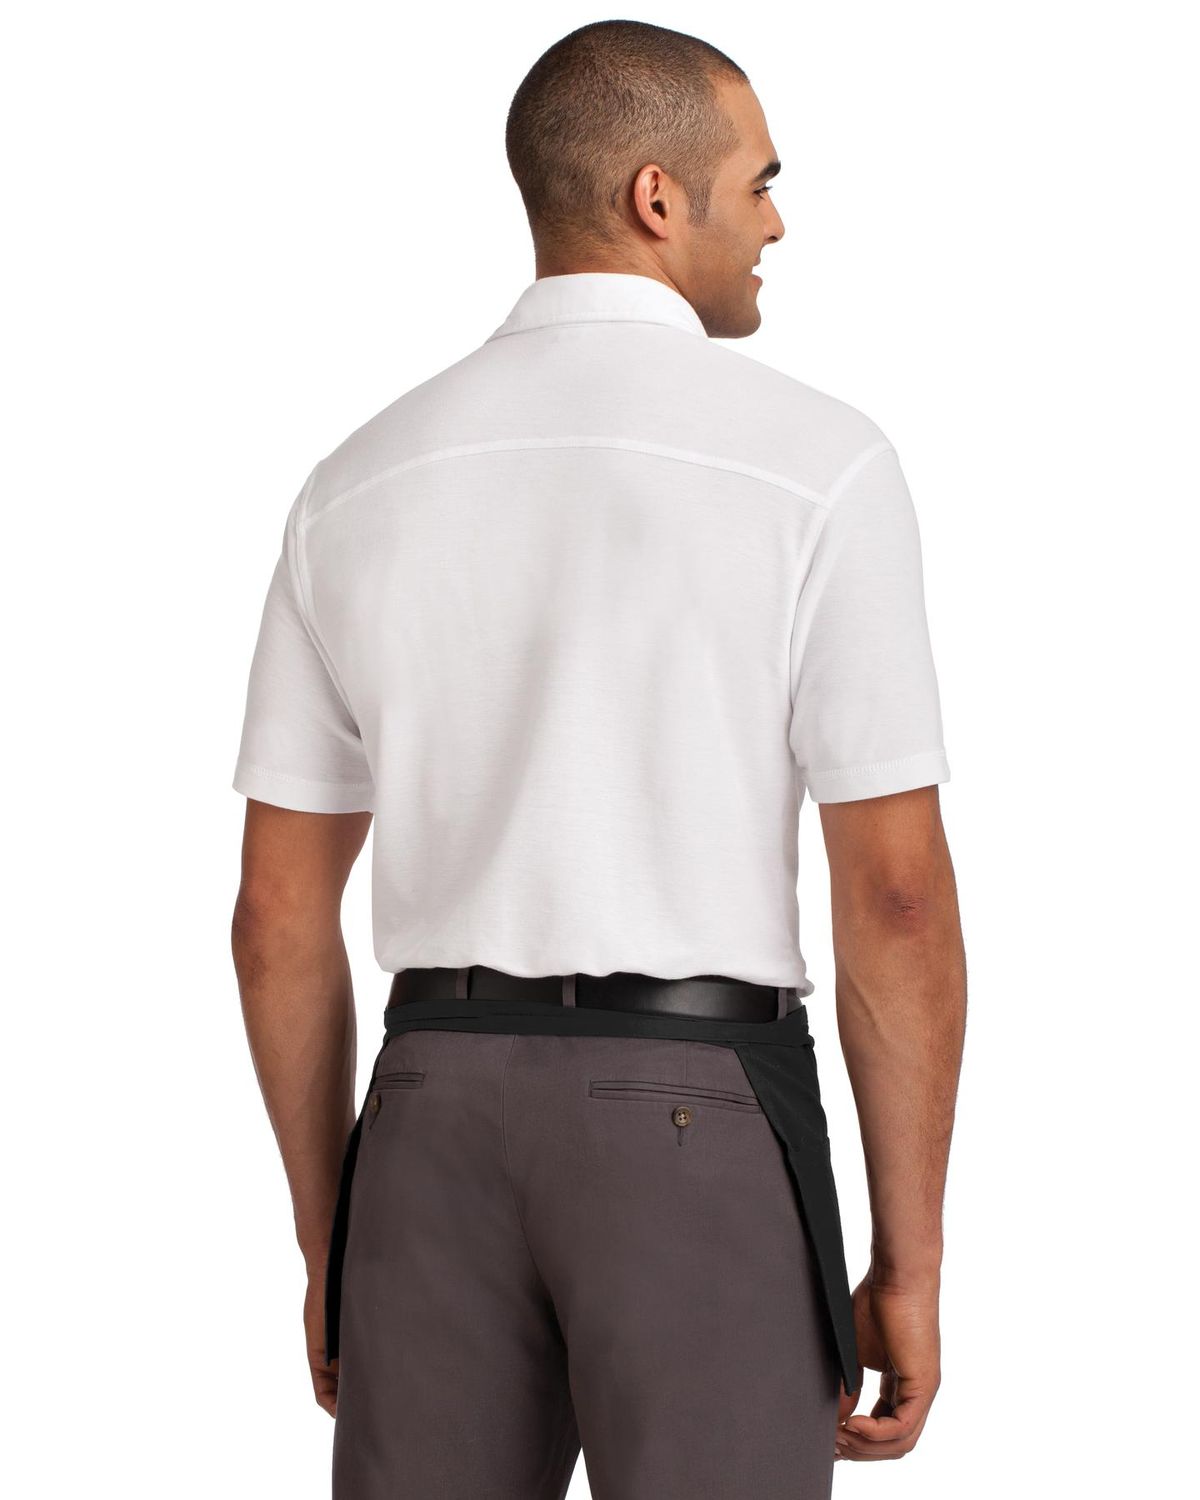 'Port Authority A702 Easy Care Waist Apron with Stain Release'